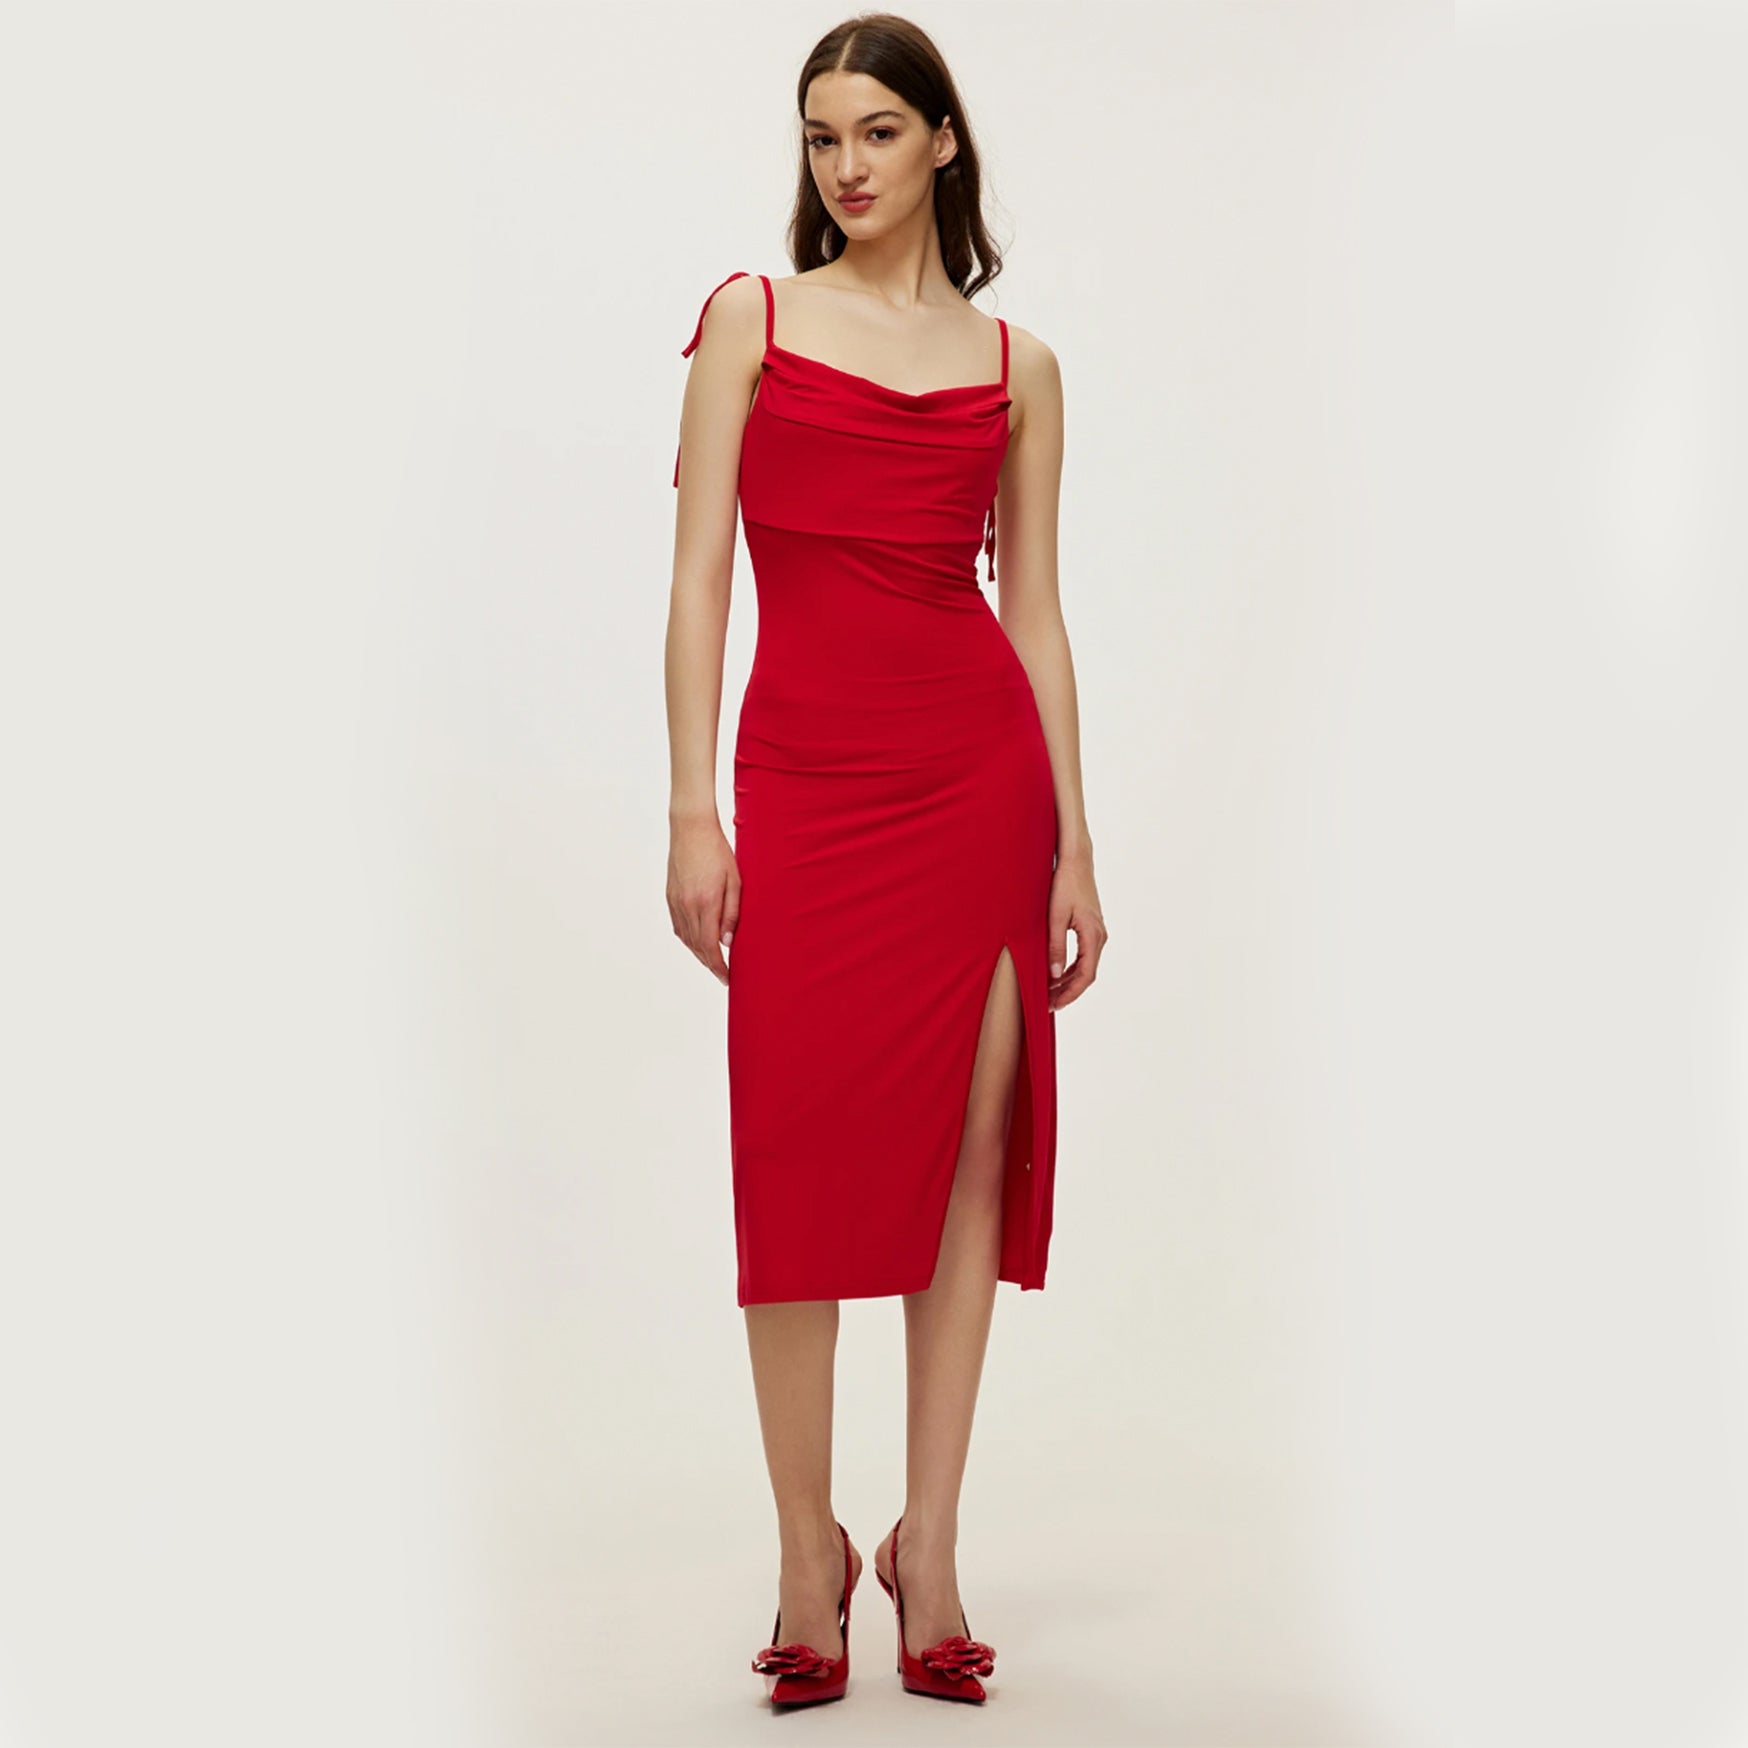 Gathered Tied Strap Midi Dress With Slit - Red L